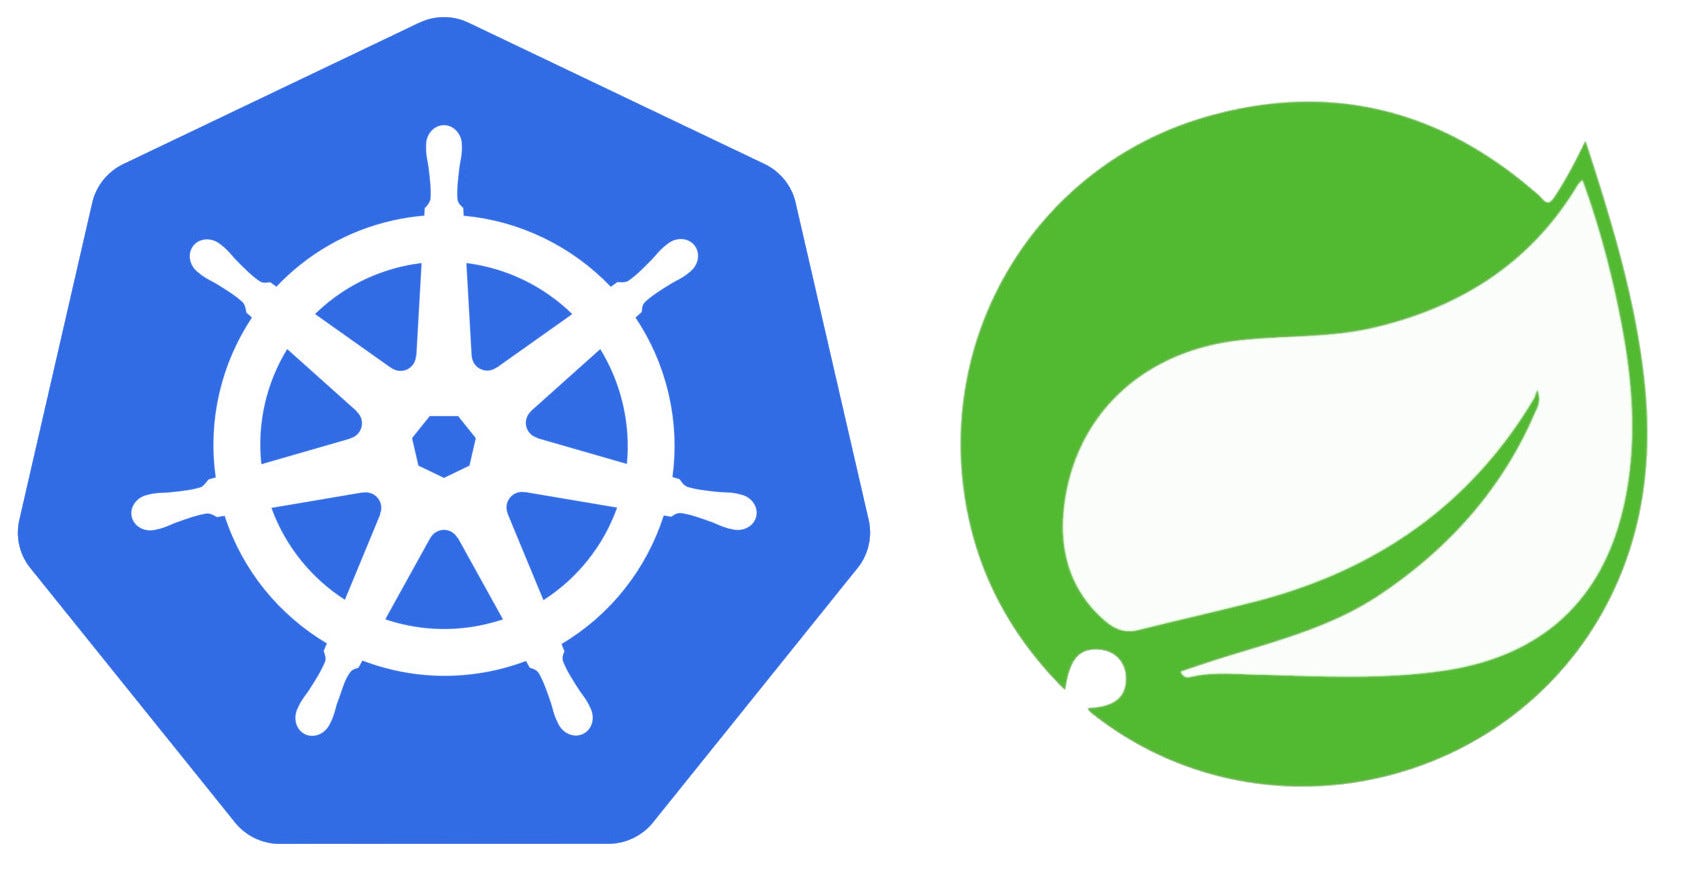 spring cloud and kubernetes